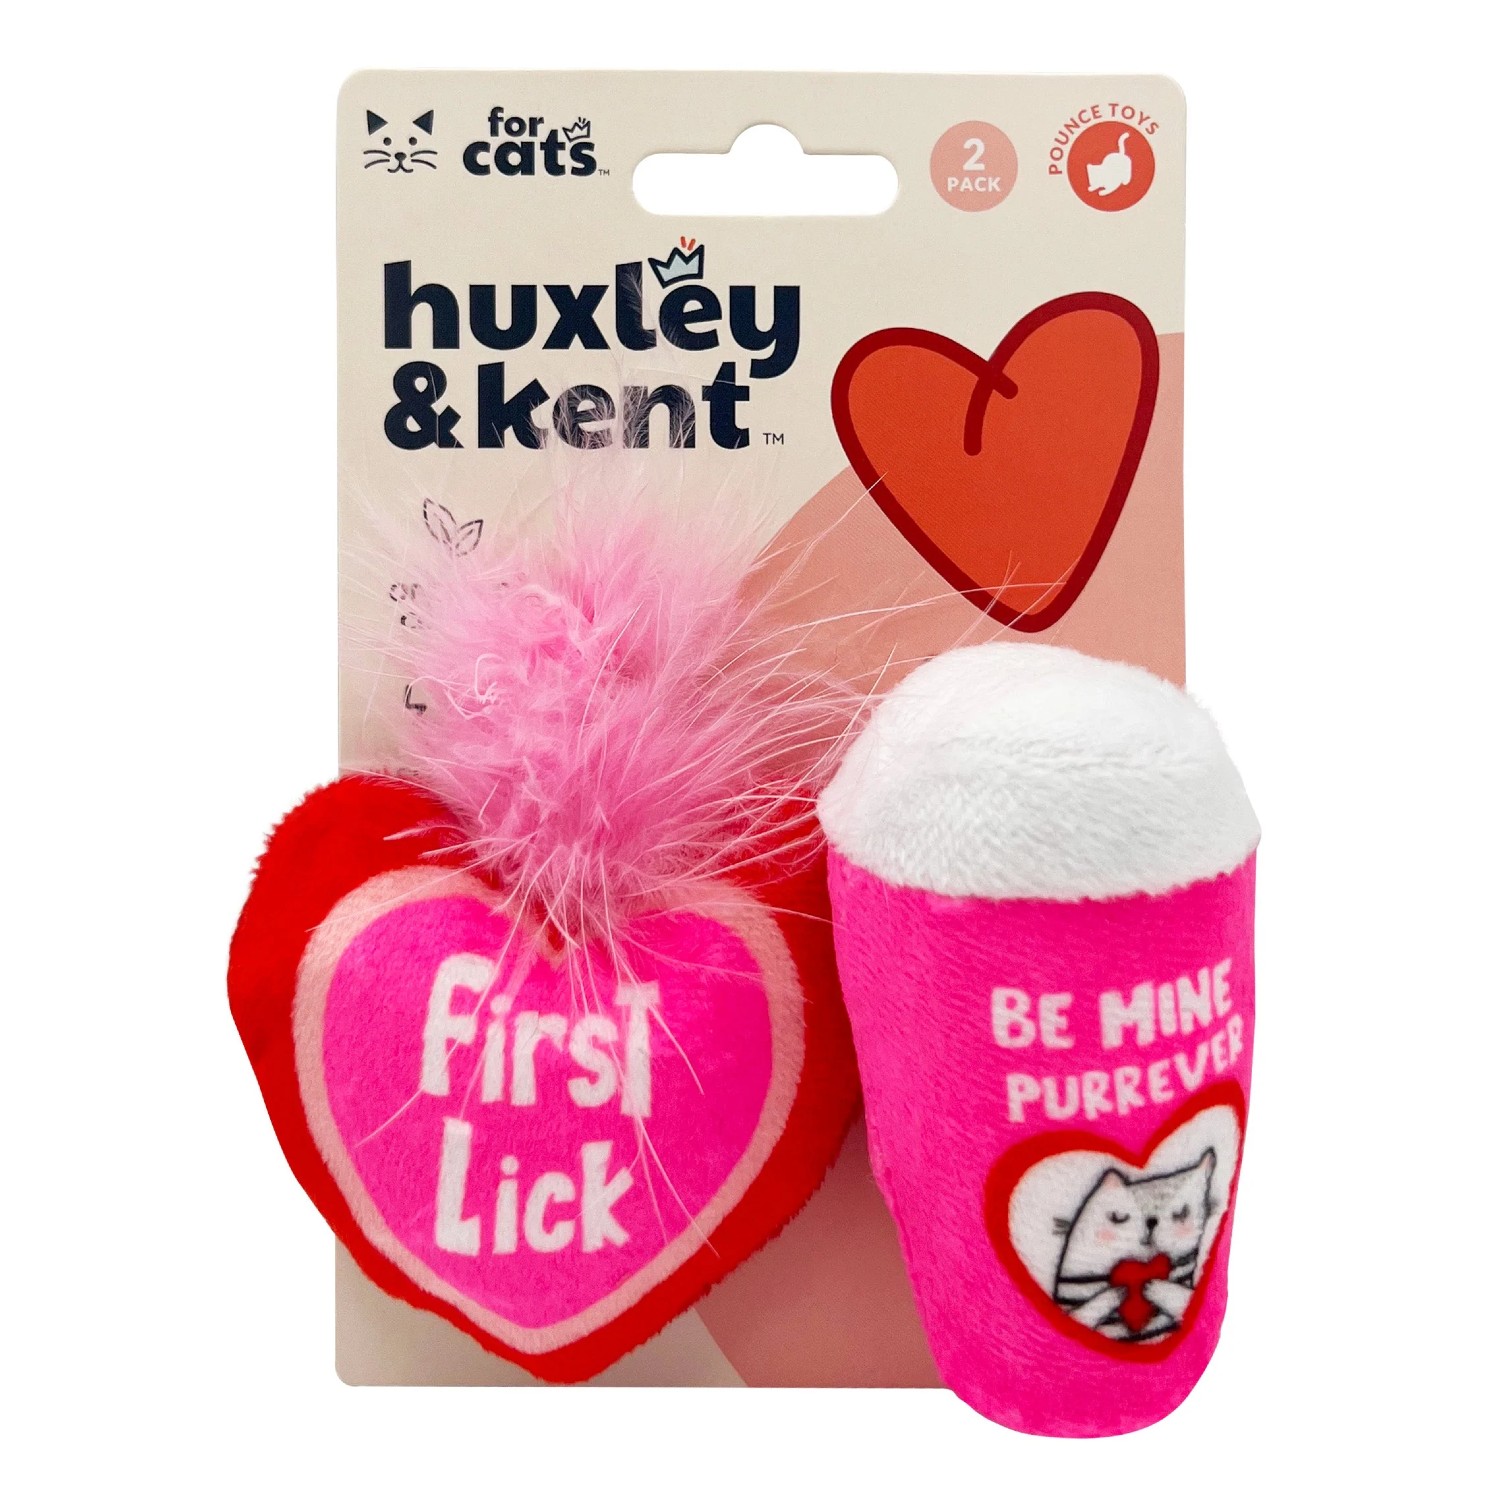 Kittybelles Celebration Bundle Plush Cat Toy - First Lick Heart & Be Mine Coffee